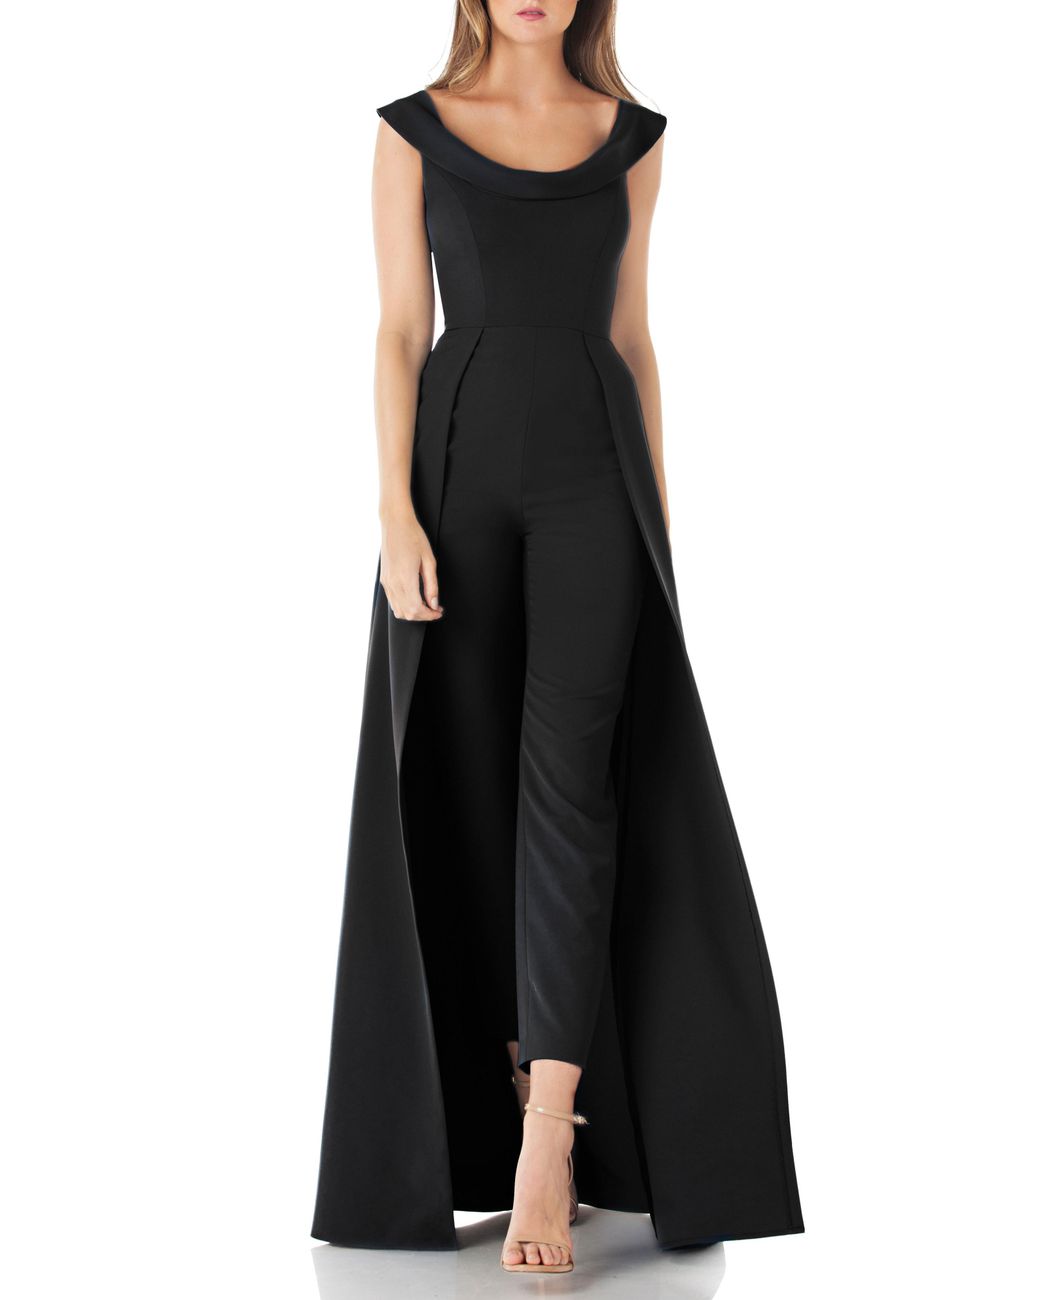 Lyst - Kay Unger Jumpsuit Gown in Black